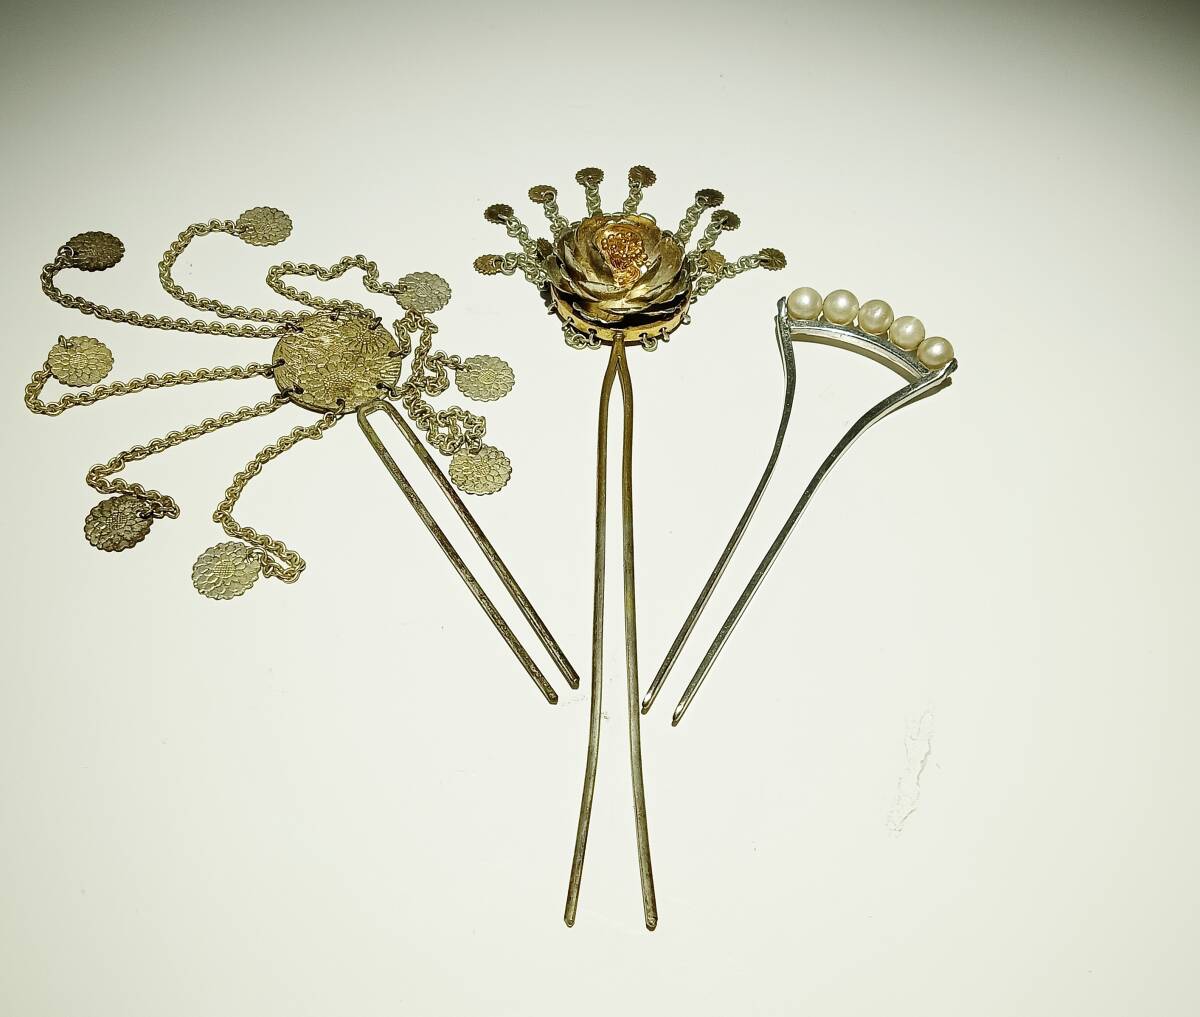 * delivery /... pearl silver made ornamental hairpin . summarize // era taking place beautiful valuable rare goods *